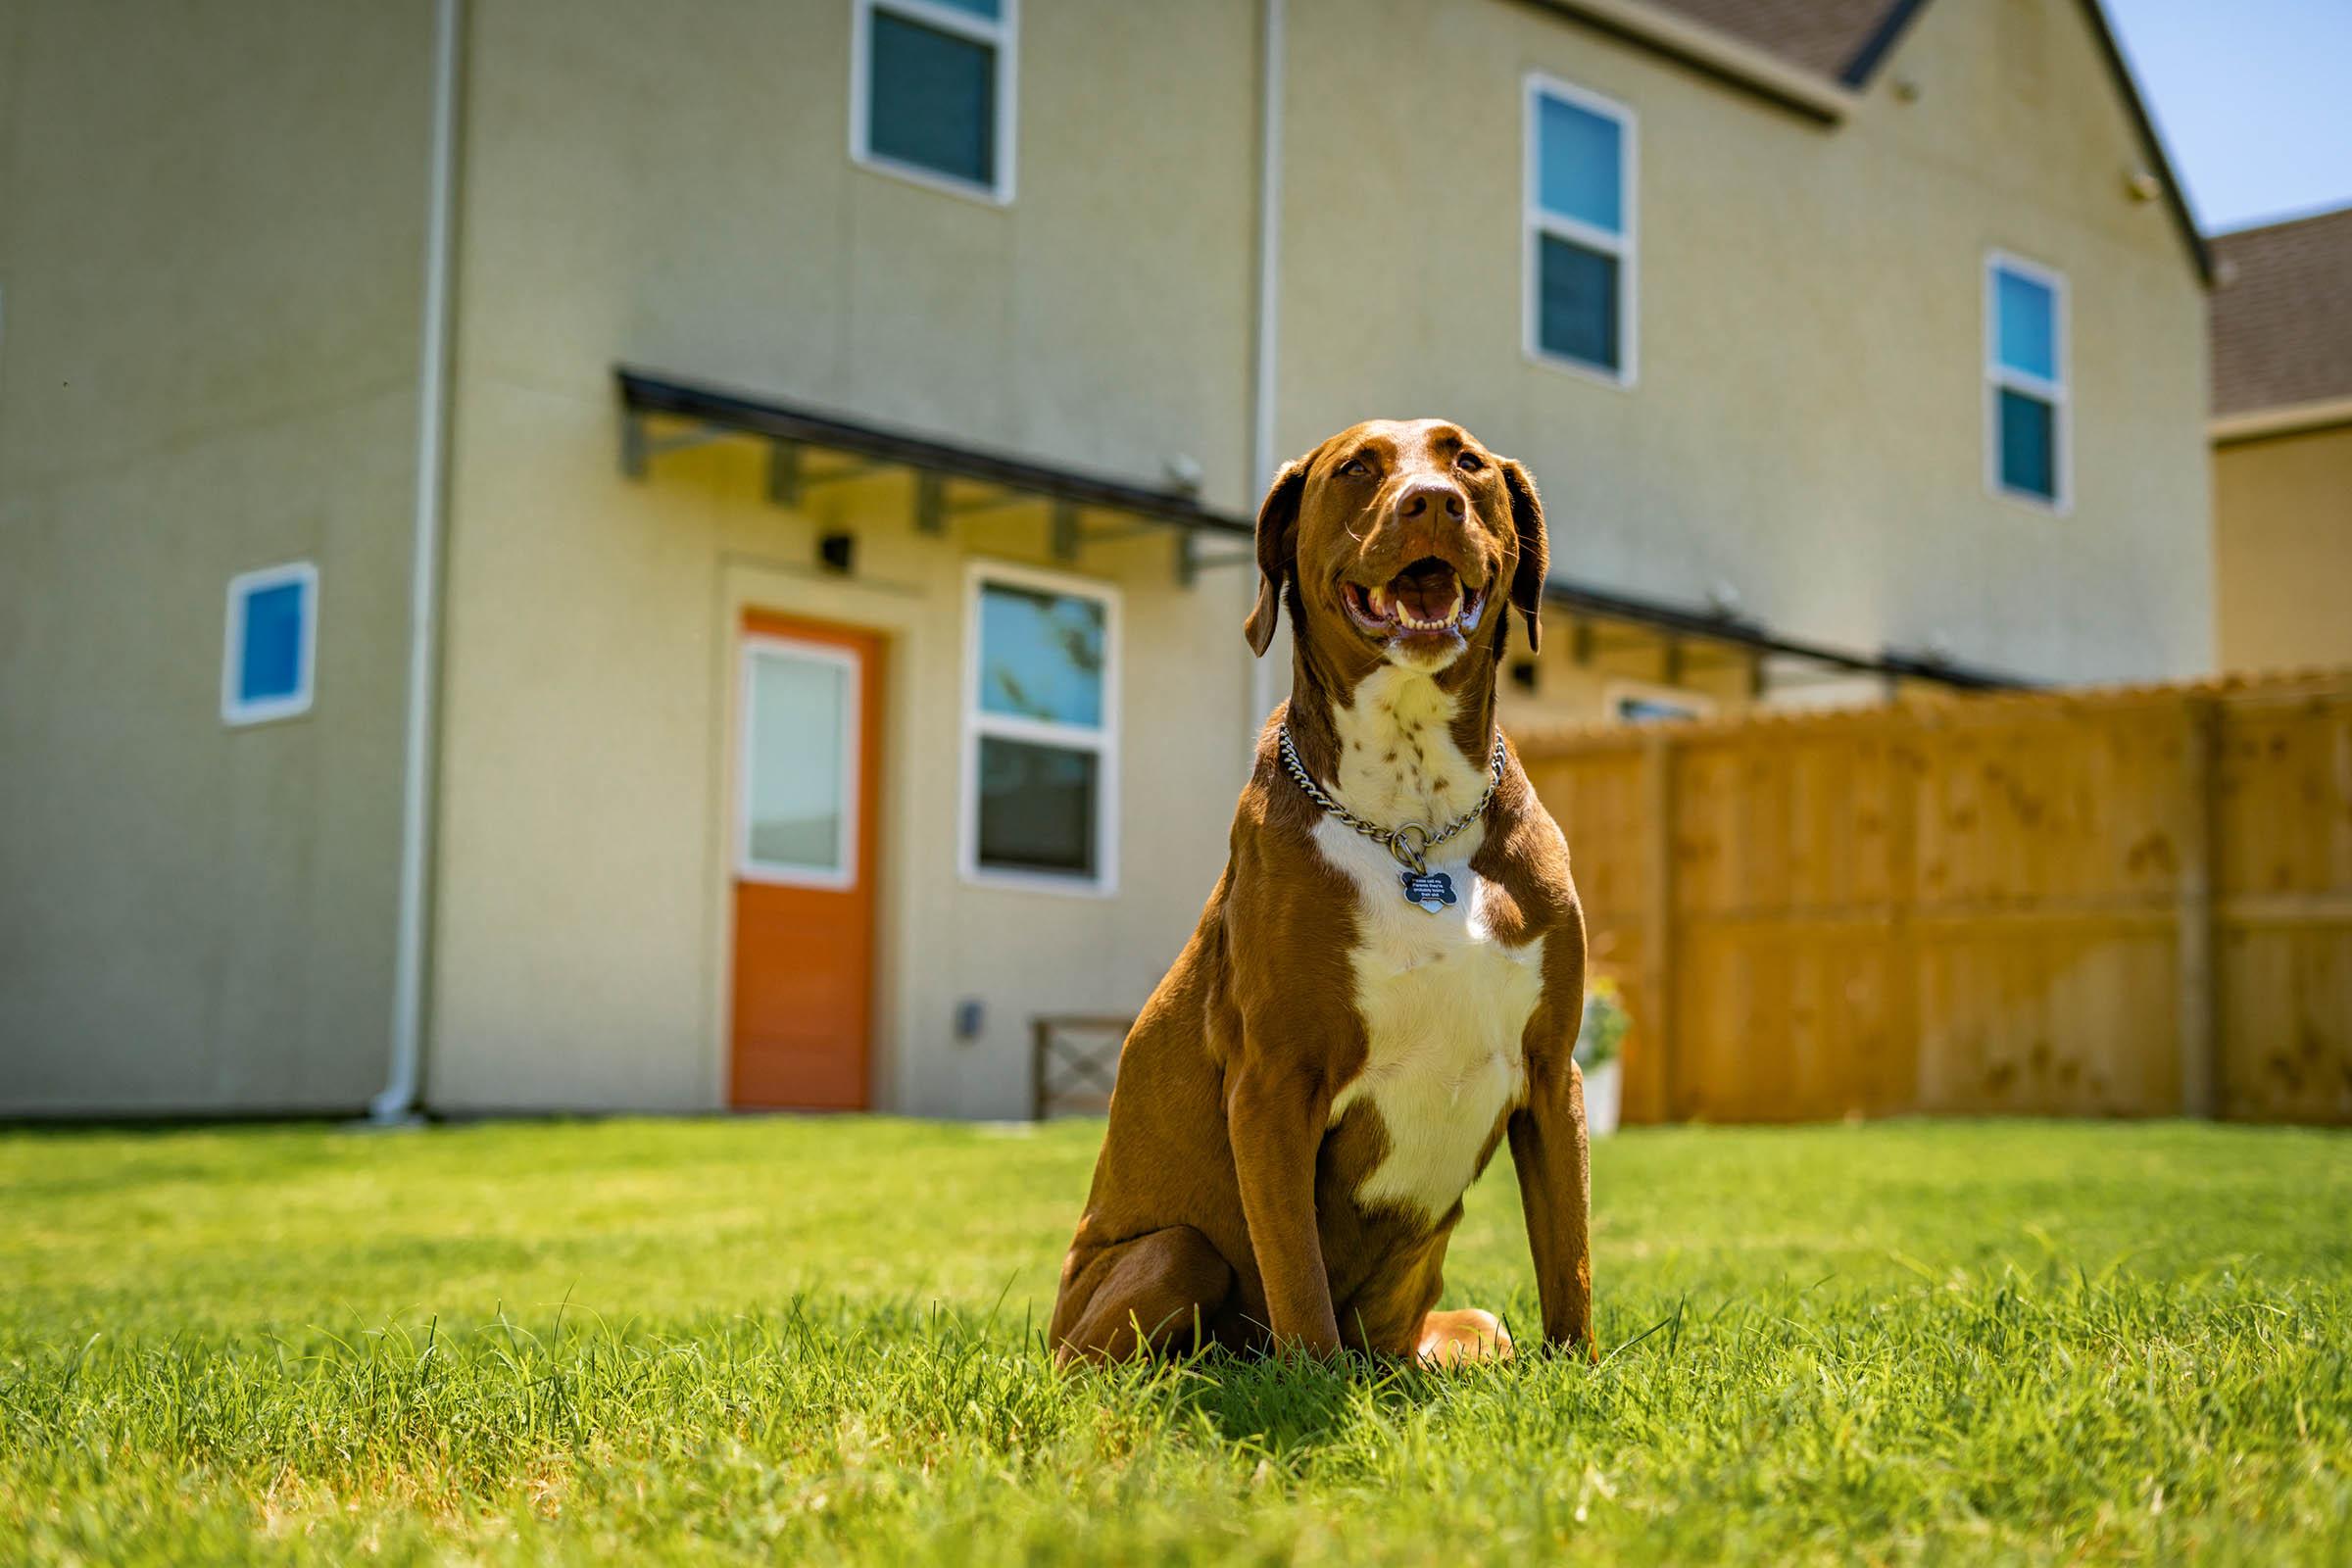 a dog standing on grass in front of a building